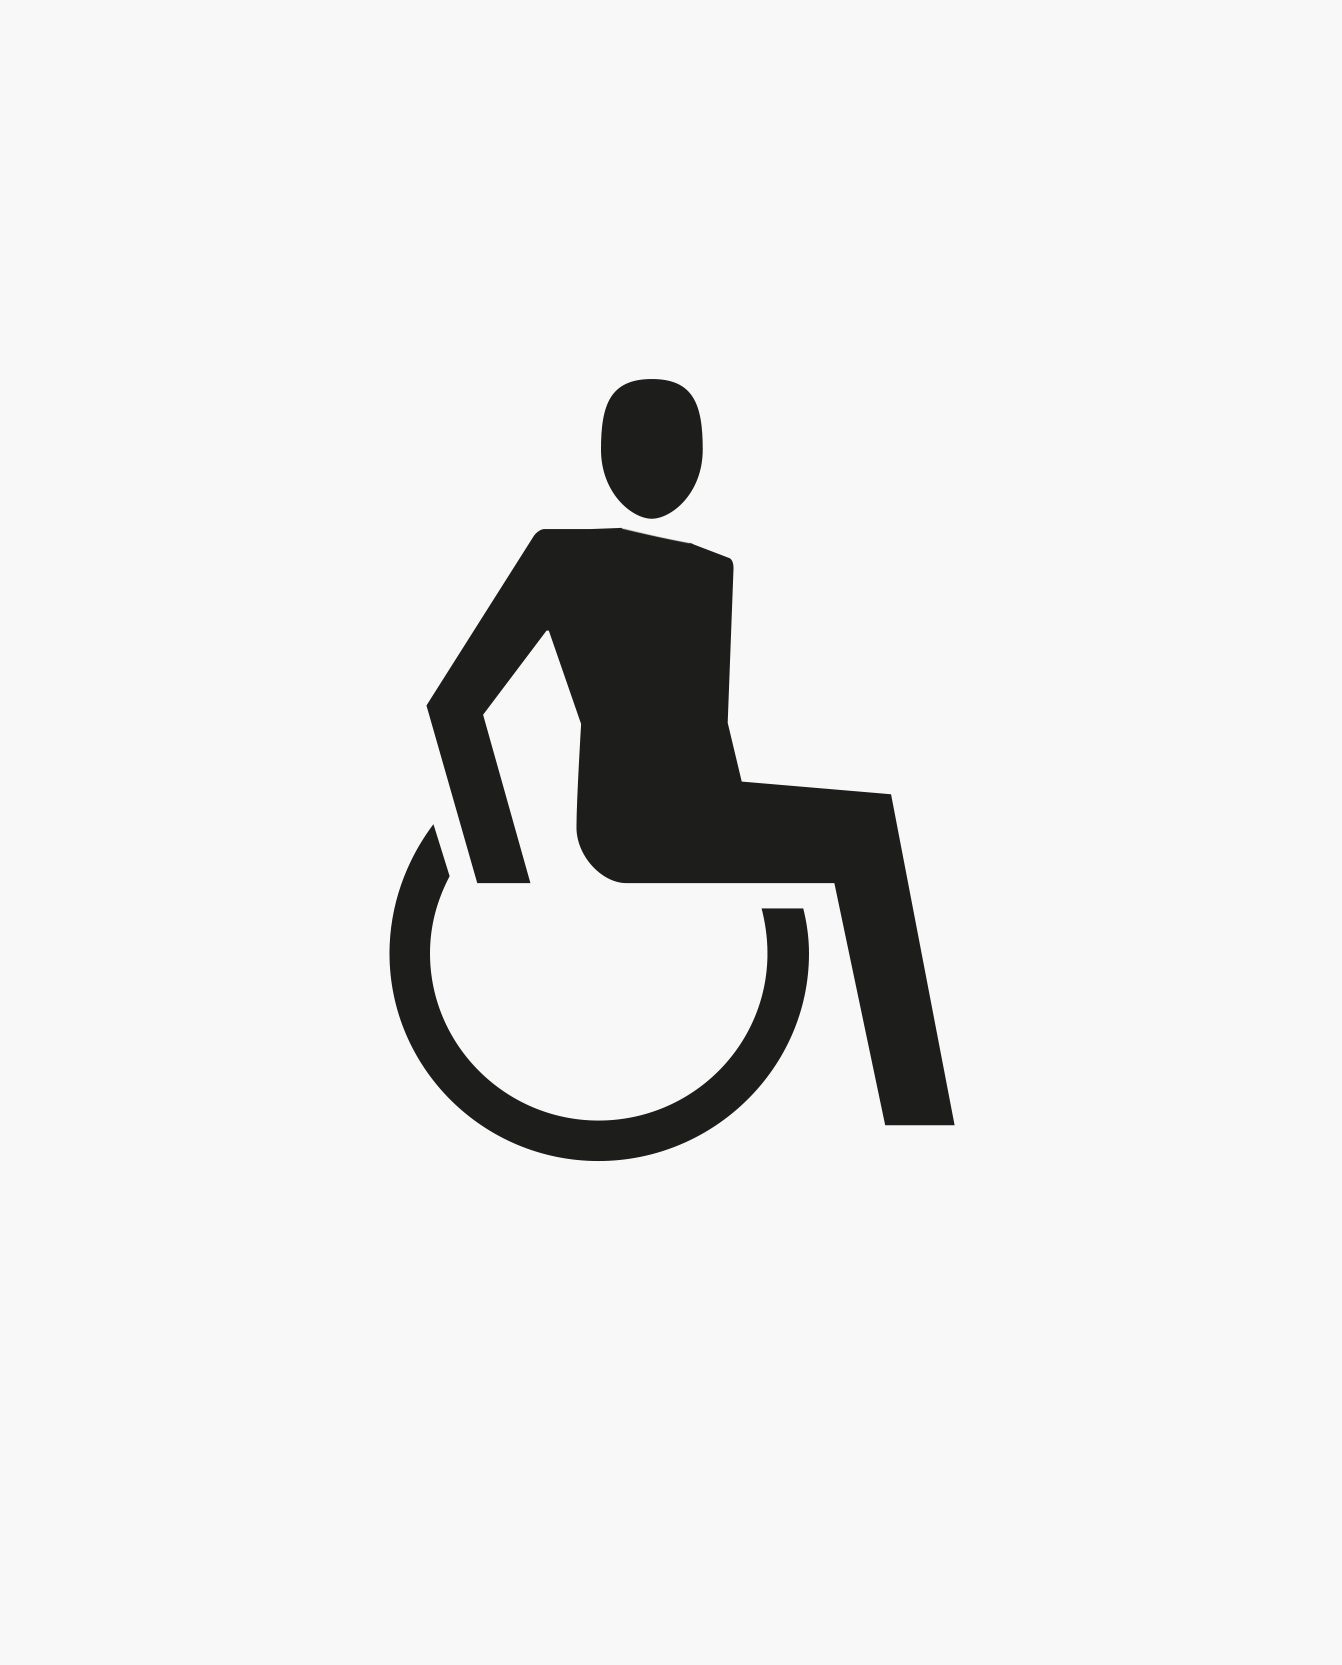 Pictogram of a person in wheelchair, self-determined and active in body expression